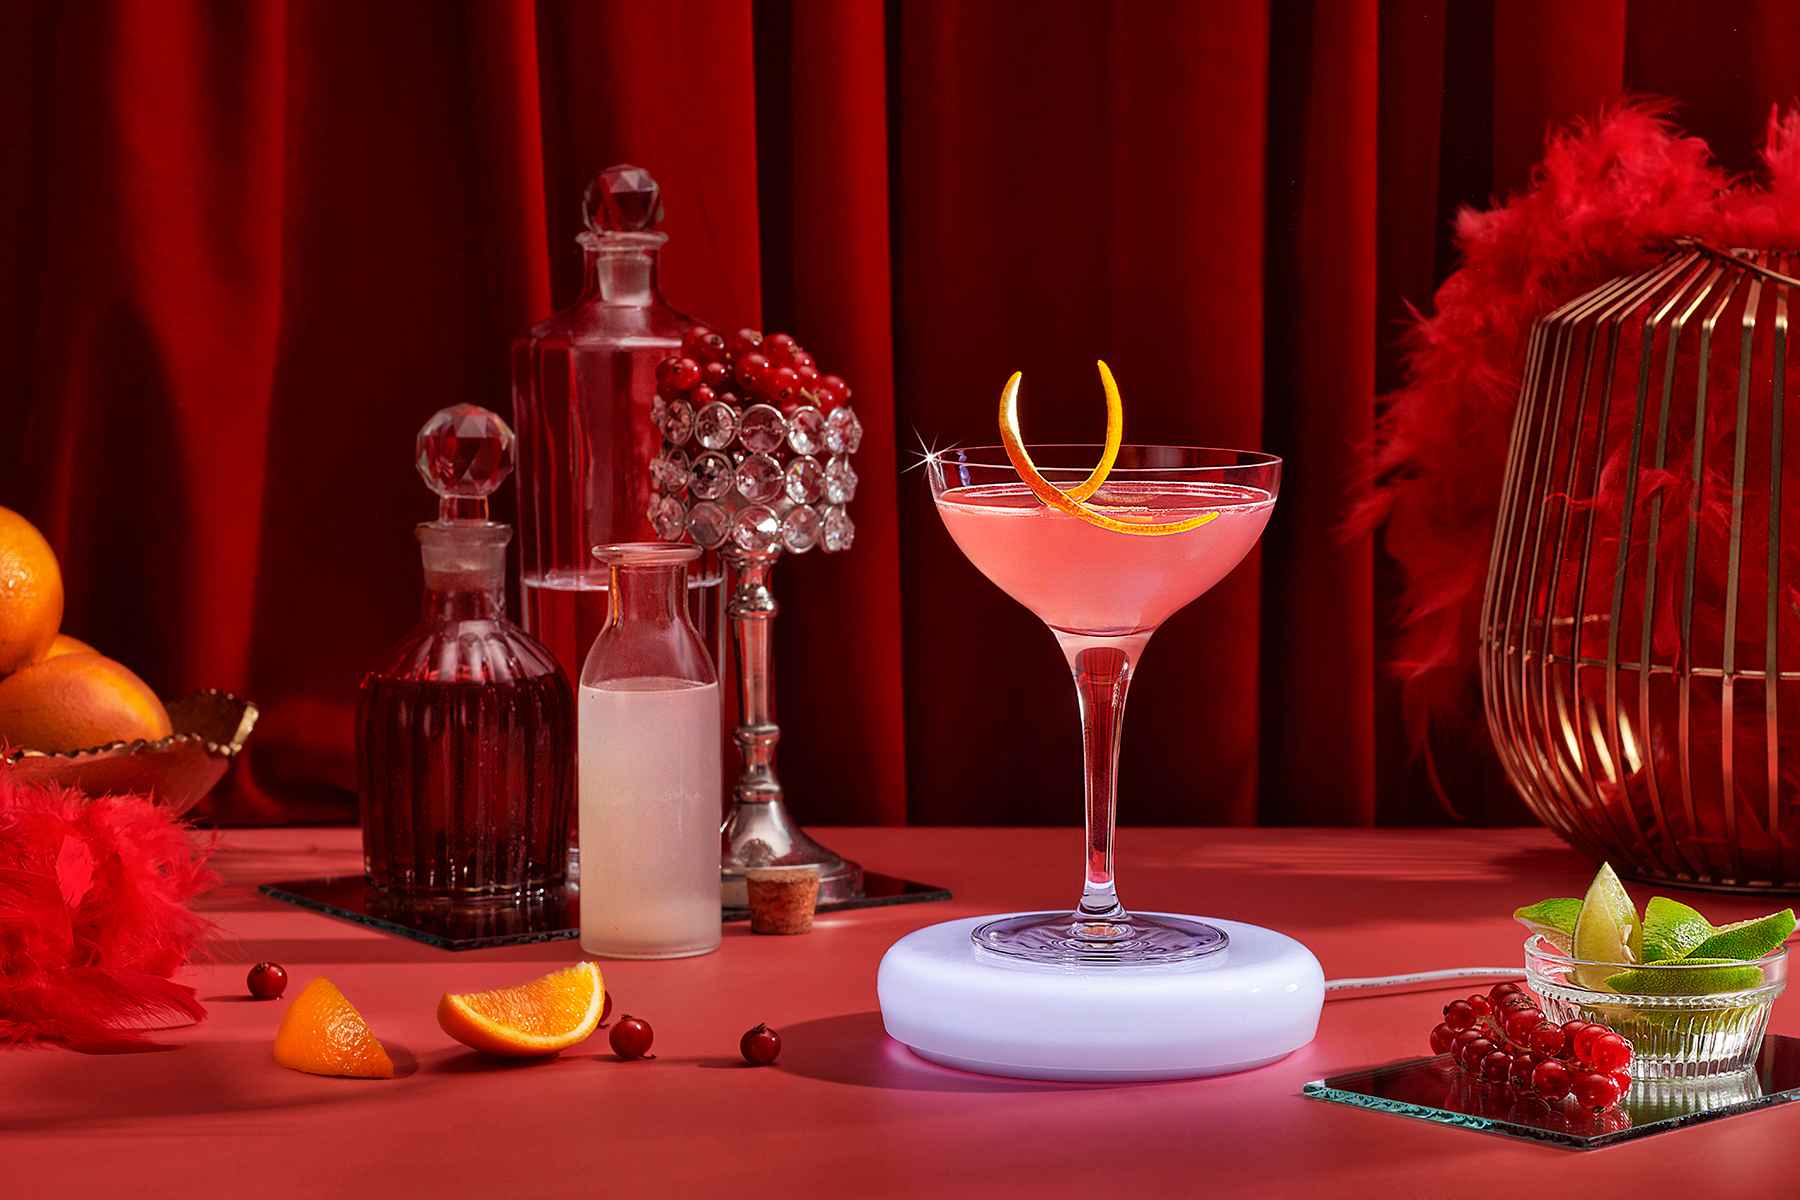 Pink cocktail in a coupe glass sitting on electronic Barsys coaster. Luxurious red background with velvet, feathers and liquor decanters.